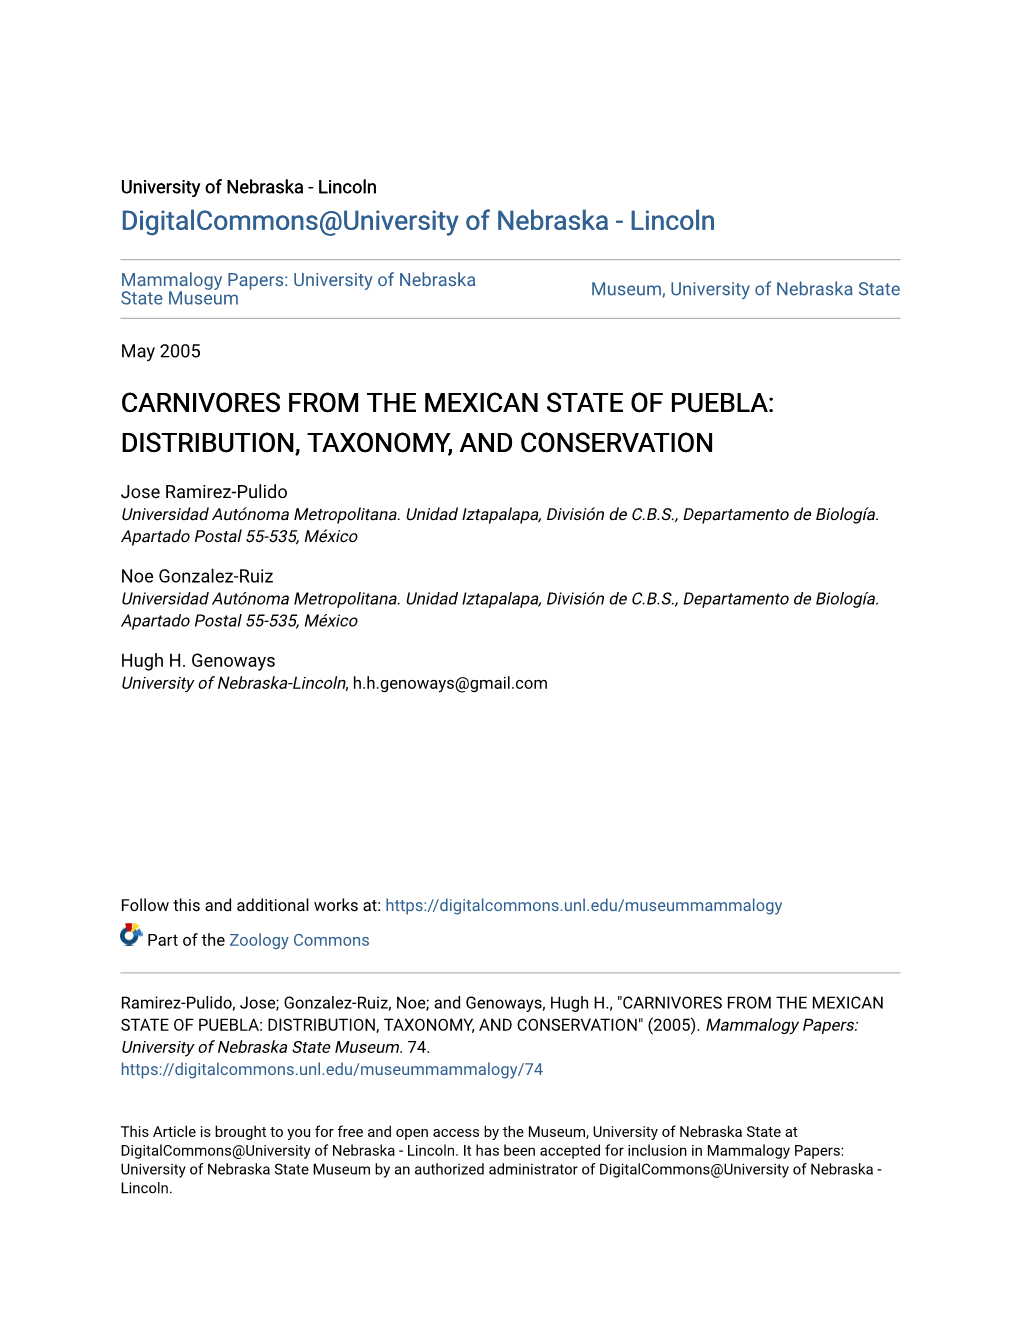 Carnivores from the Mexican State of Puebla: Distribution, Taxonomy, and Conservation